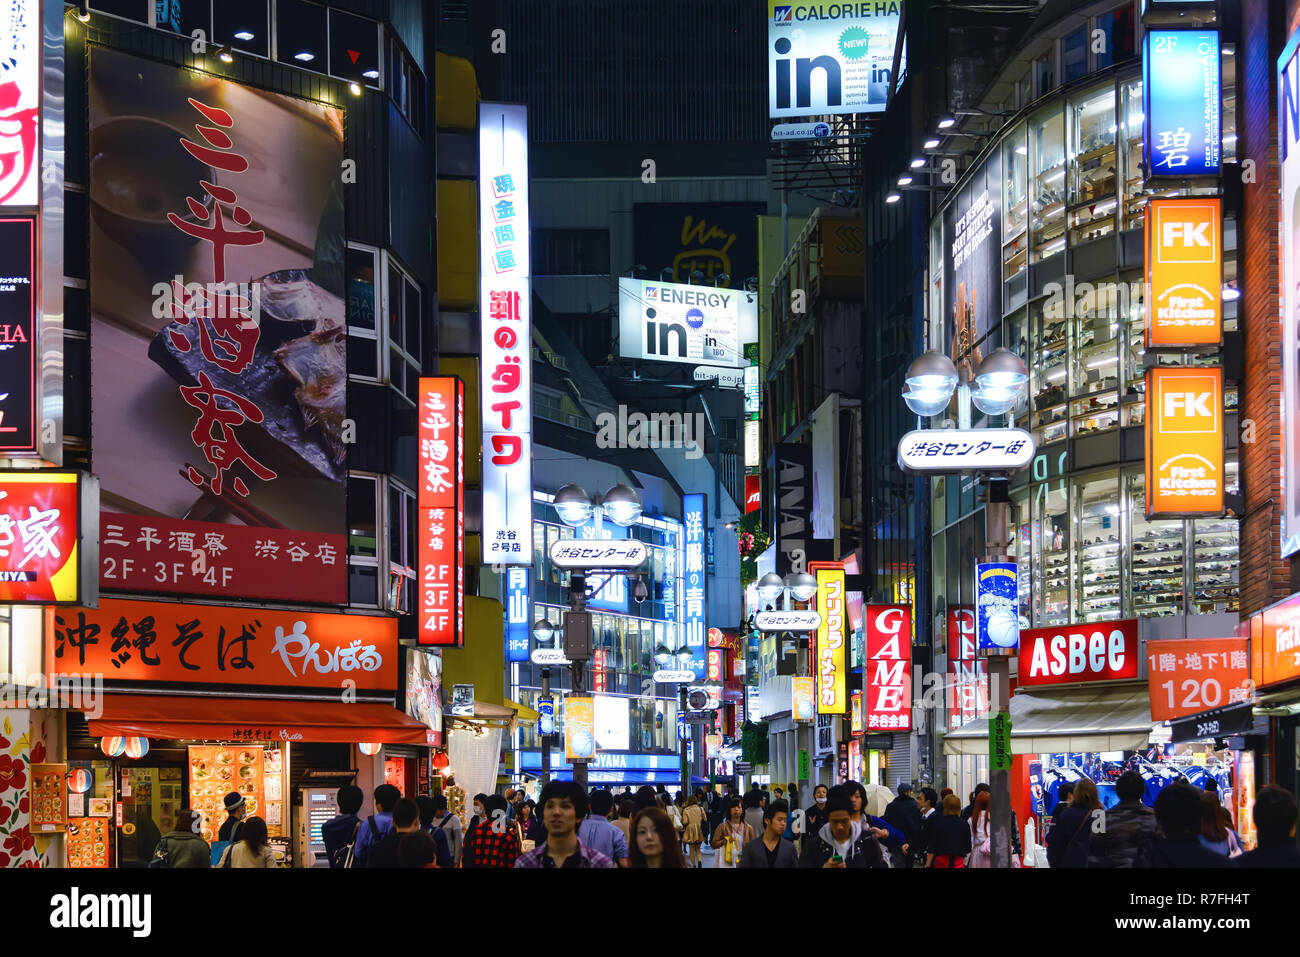 Tokyo, Japan - April 21, 2014: View of Shibuya district at night. Shibuya is known as one of the fashion centers of Japan for young people Stock Photo